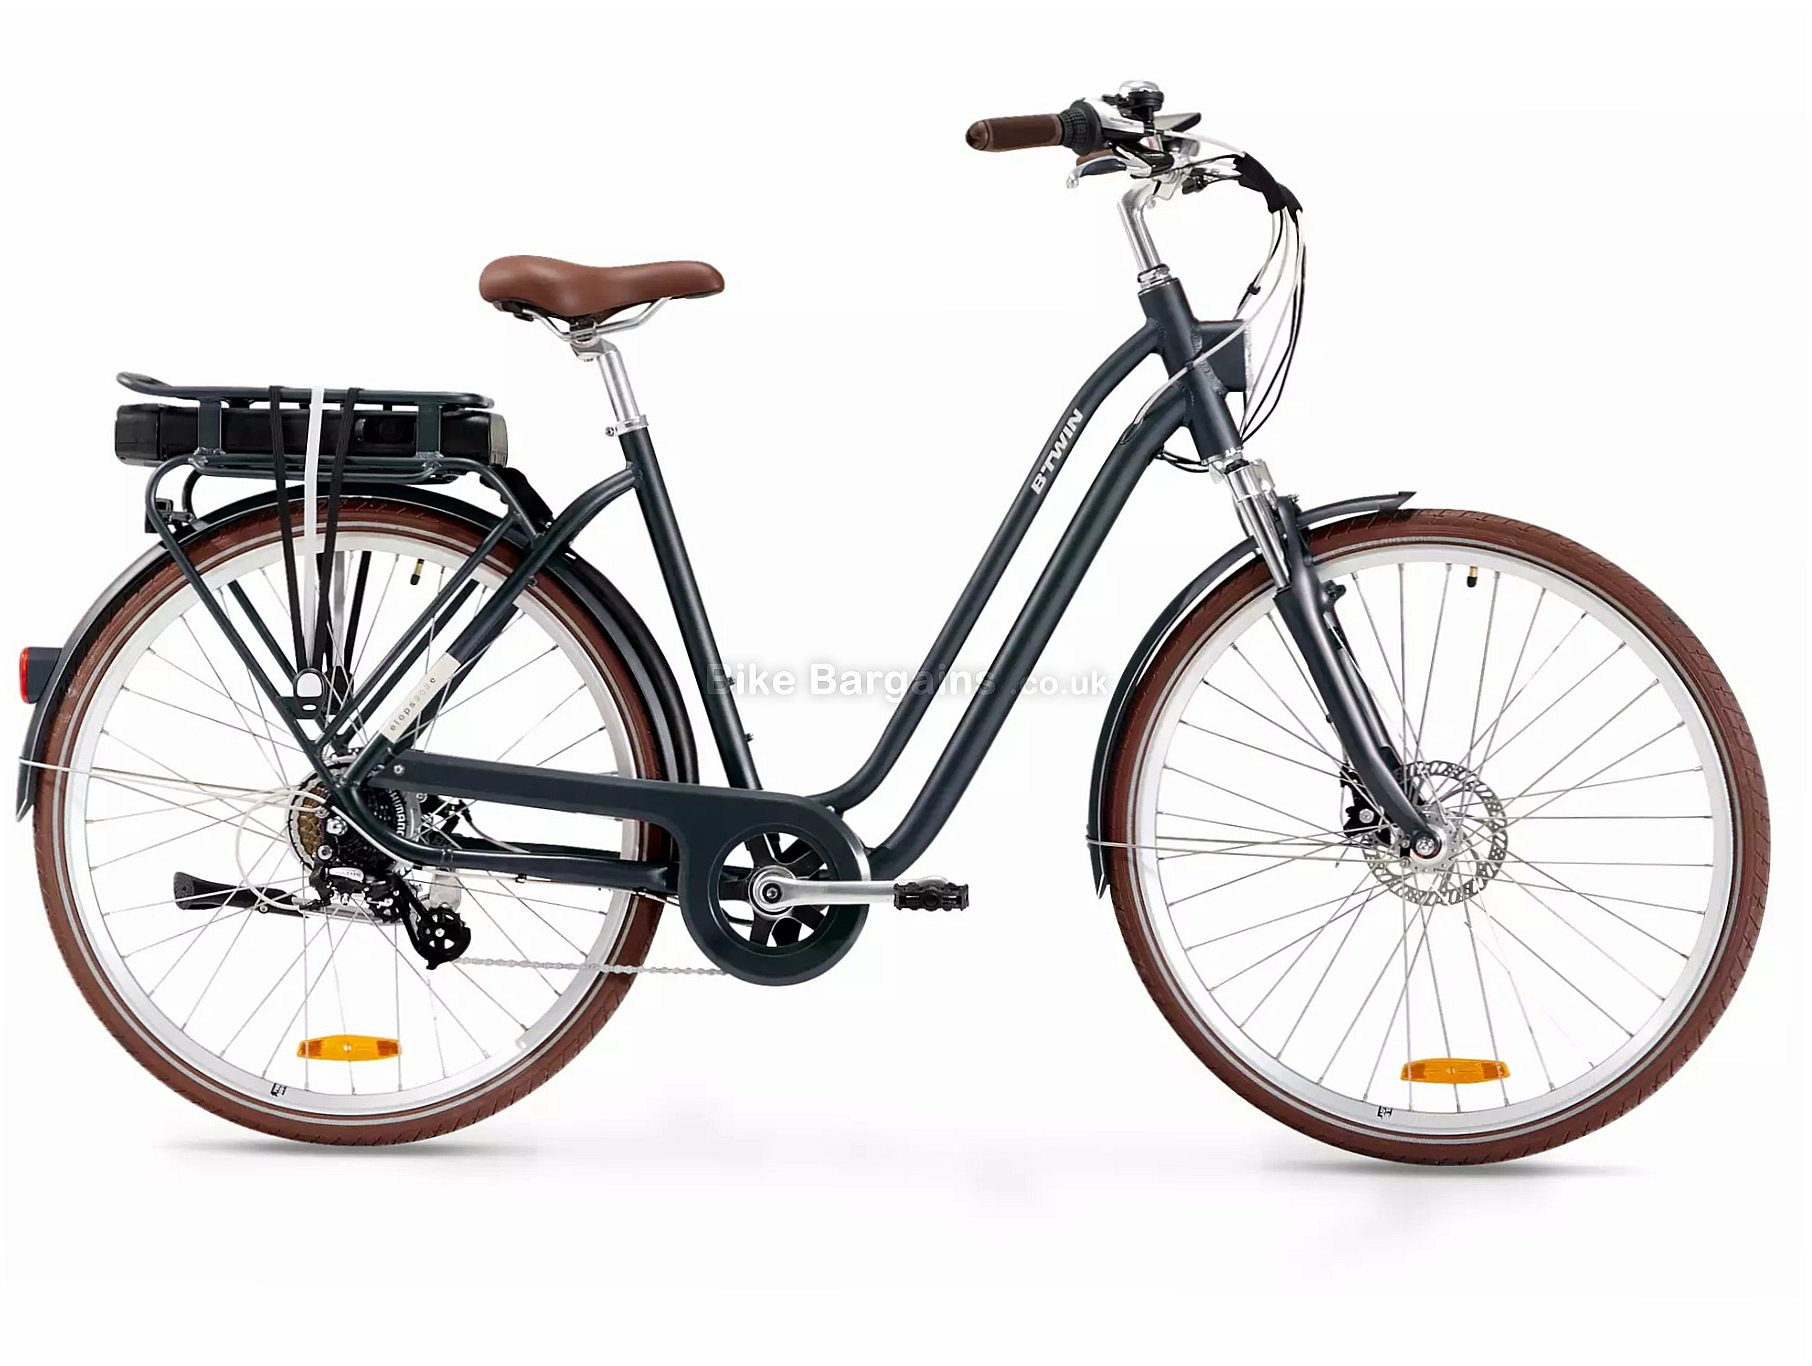 btwin electric cycles